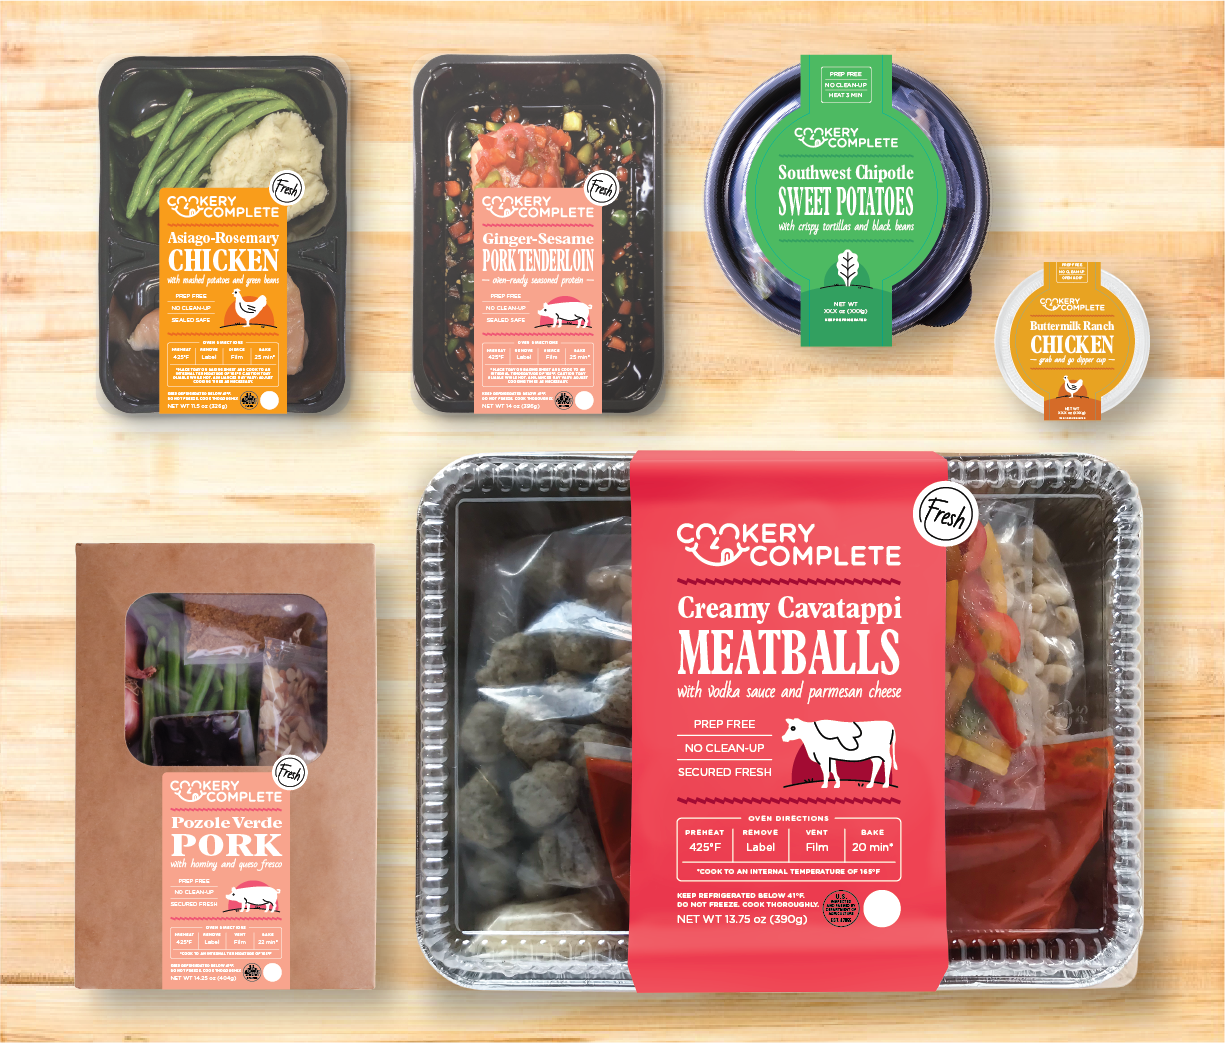 A Fresh Take on Meal Kit Packaging Helps This Brand Stand Out